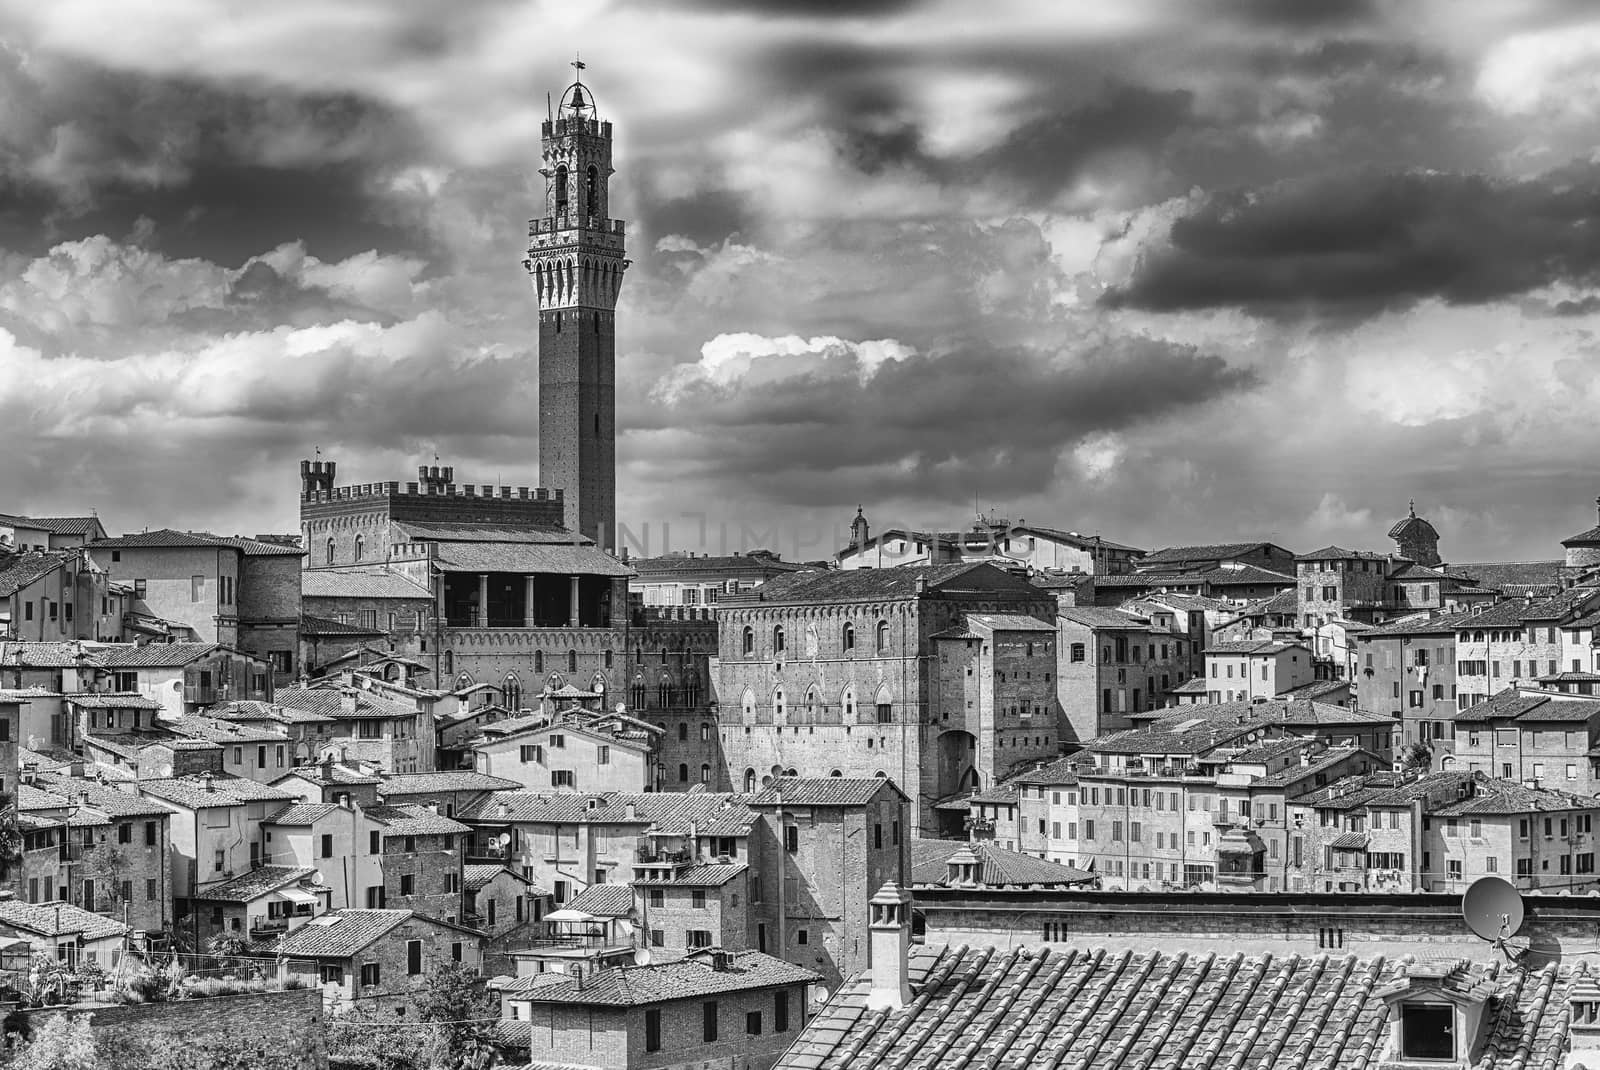 View over the picturesque city centre of Siena, one of the nation's most visited tourist attractions in Italy